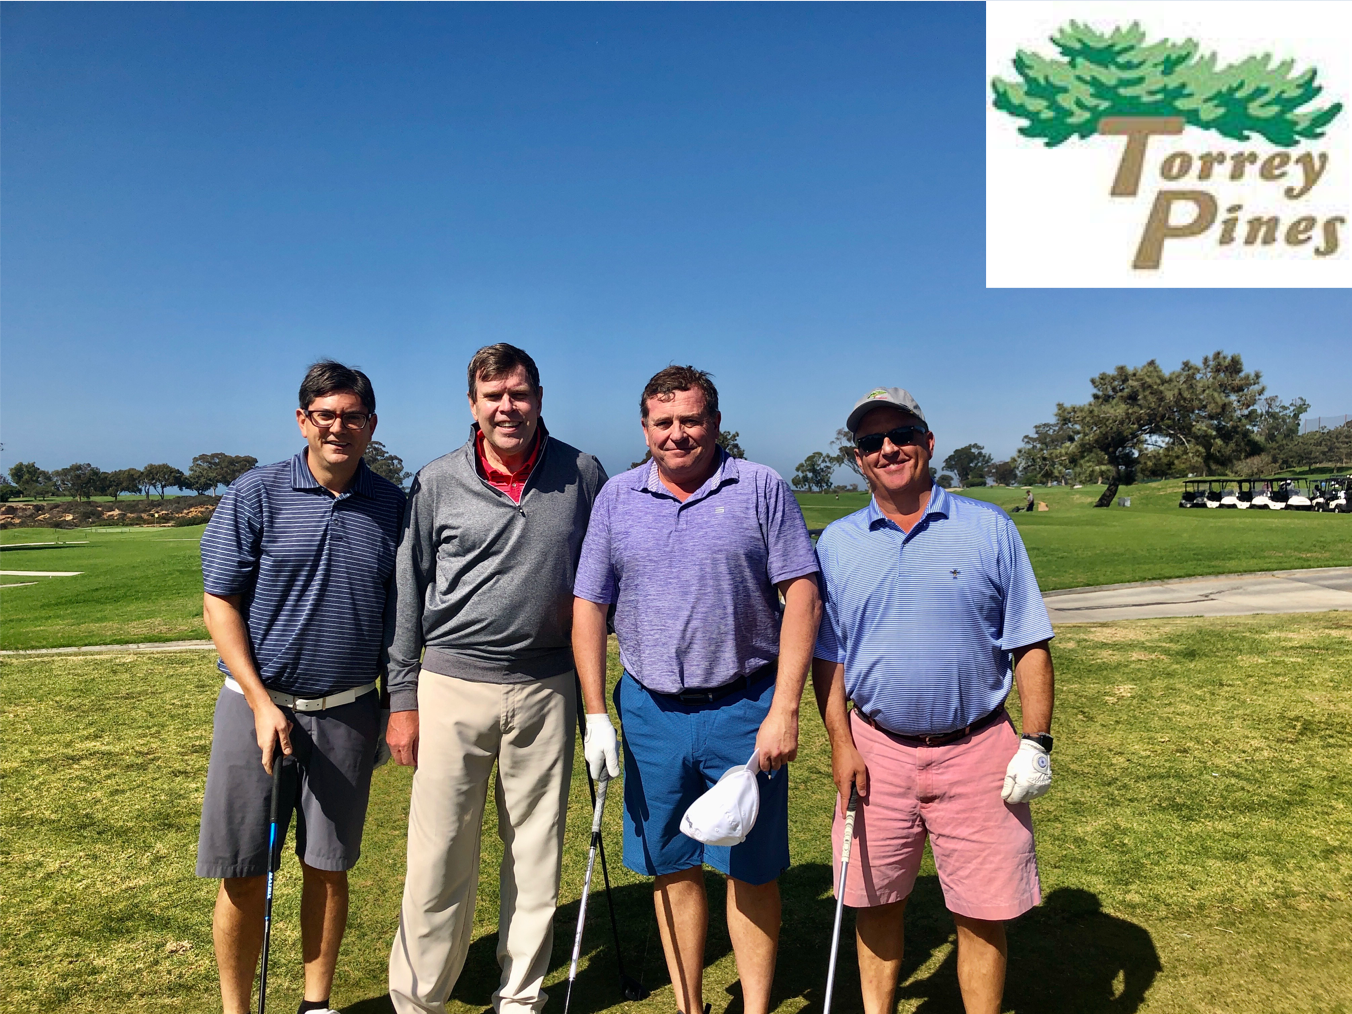 Client entertainment trip to Torrey Pines in LaJolla, California